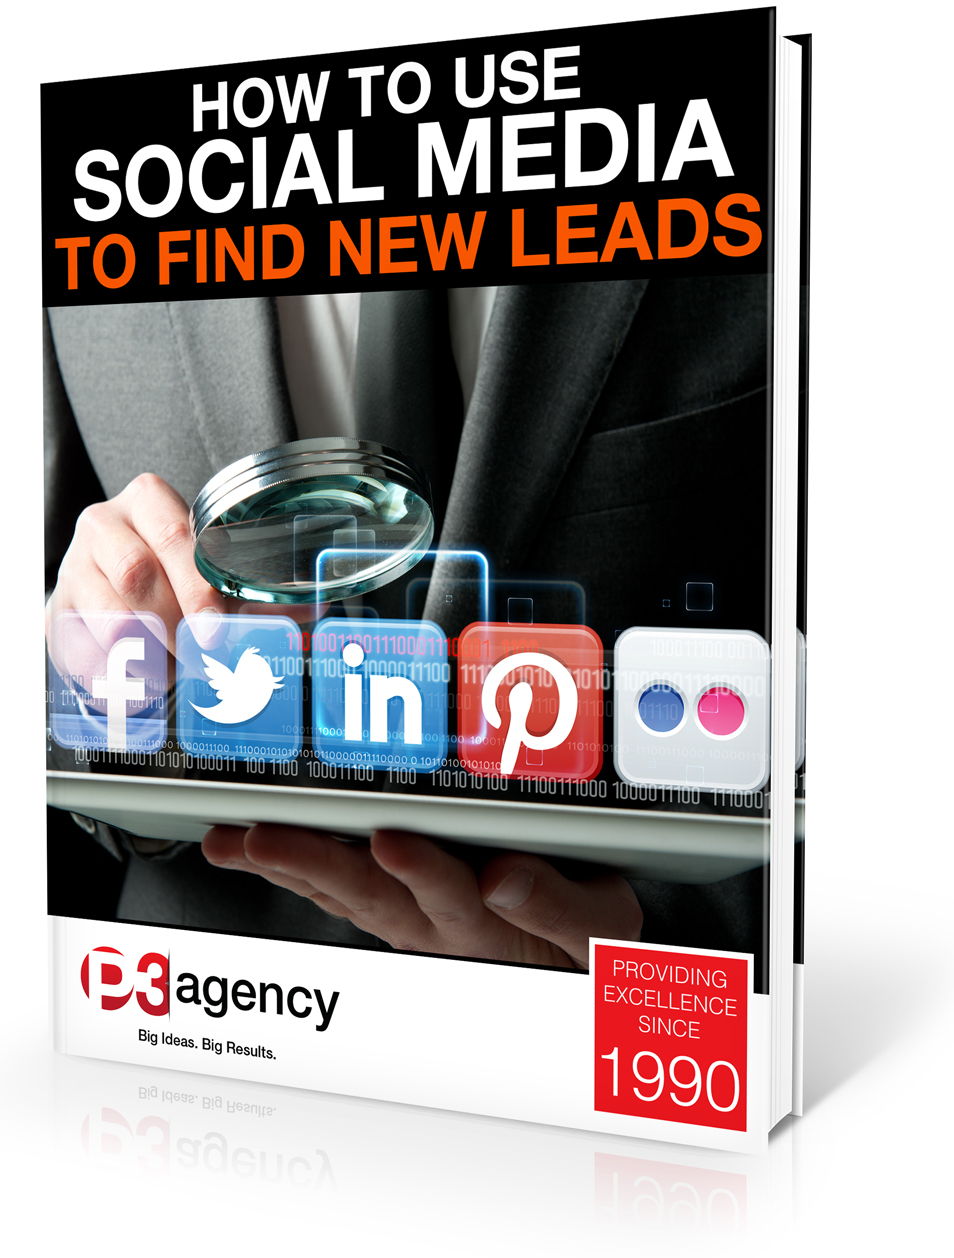 How to Use Social Media to Find New Leads